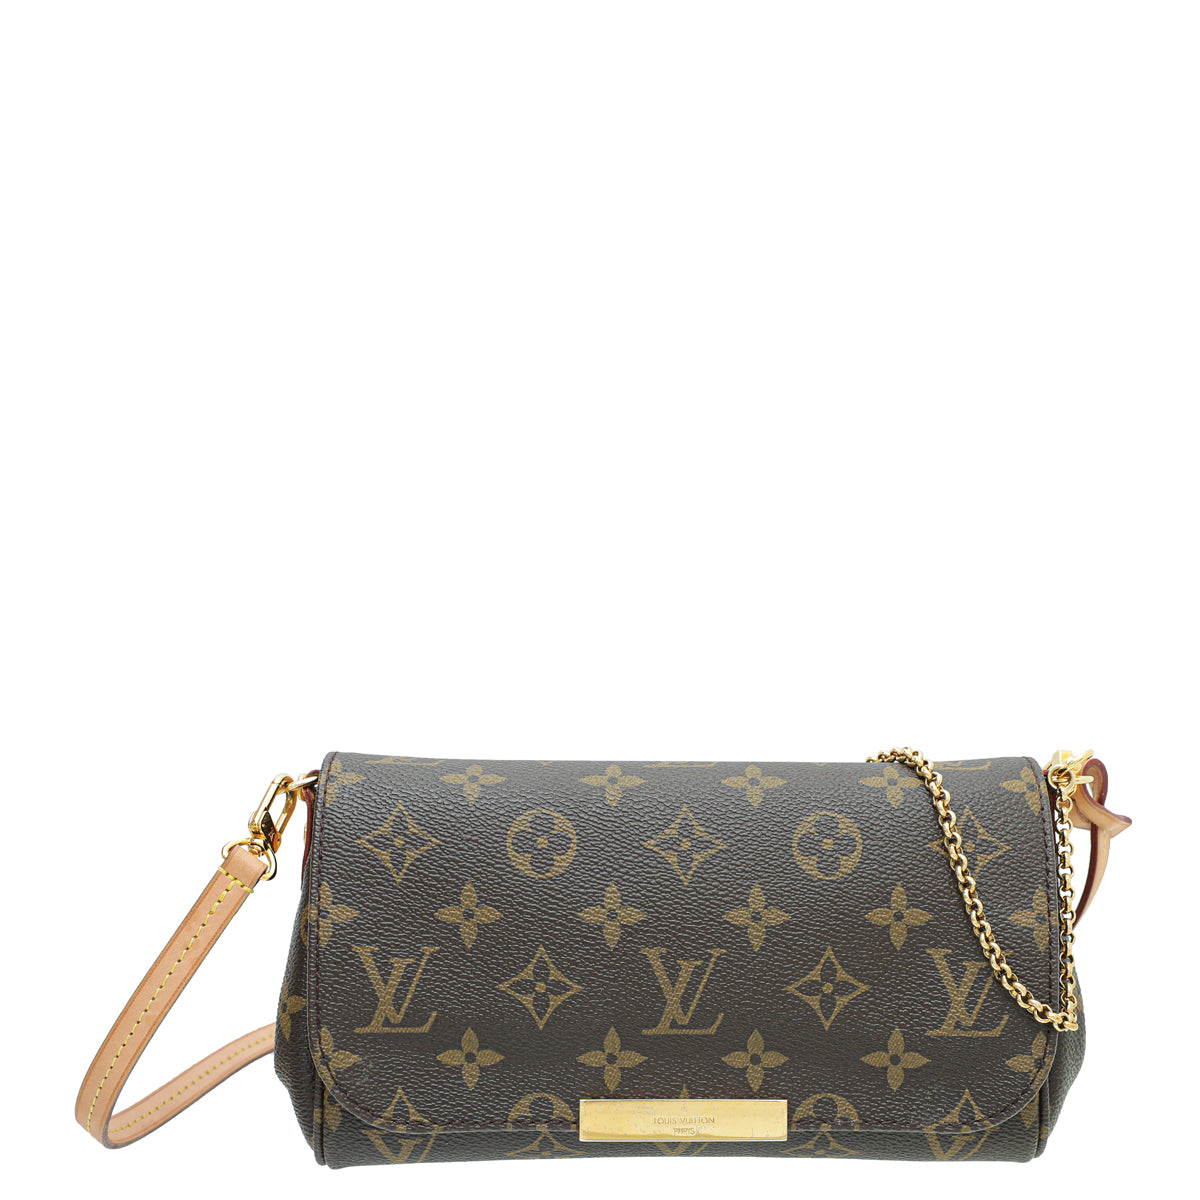 Louis Vuitton Brown Monogram Favorite PM Bag W/ Chain and Leather Strap